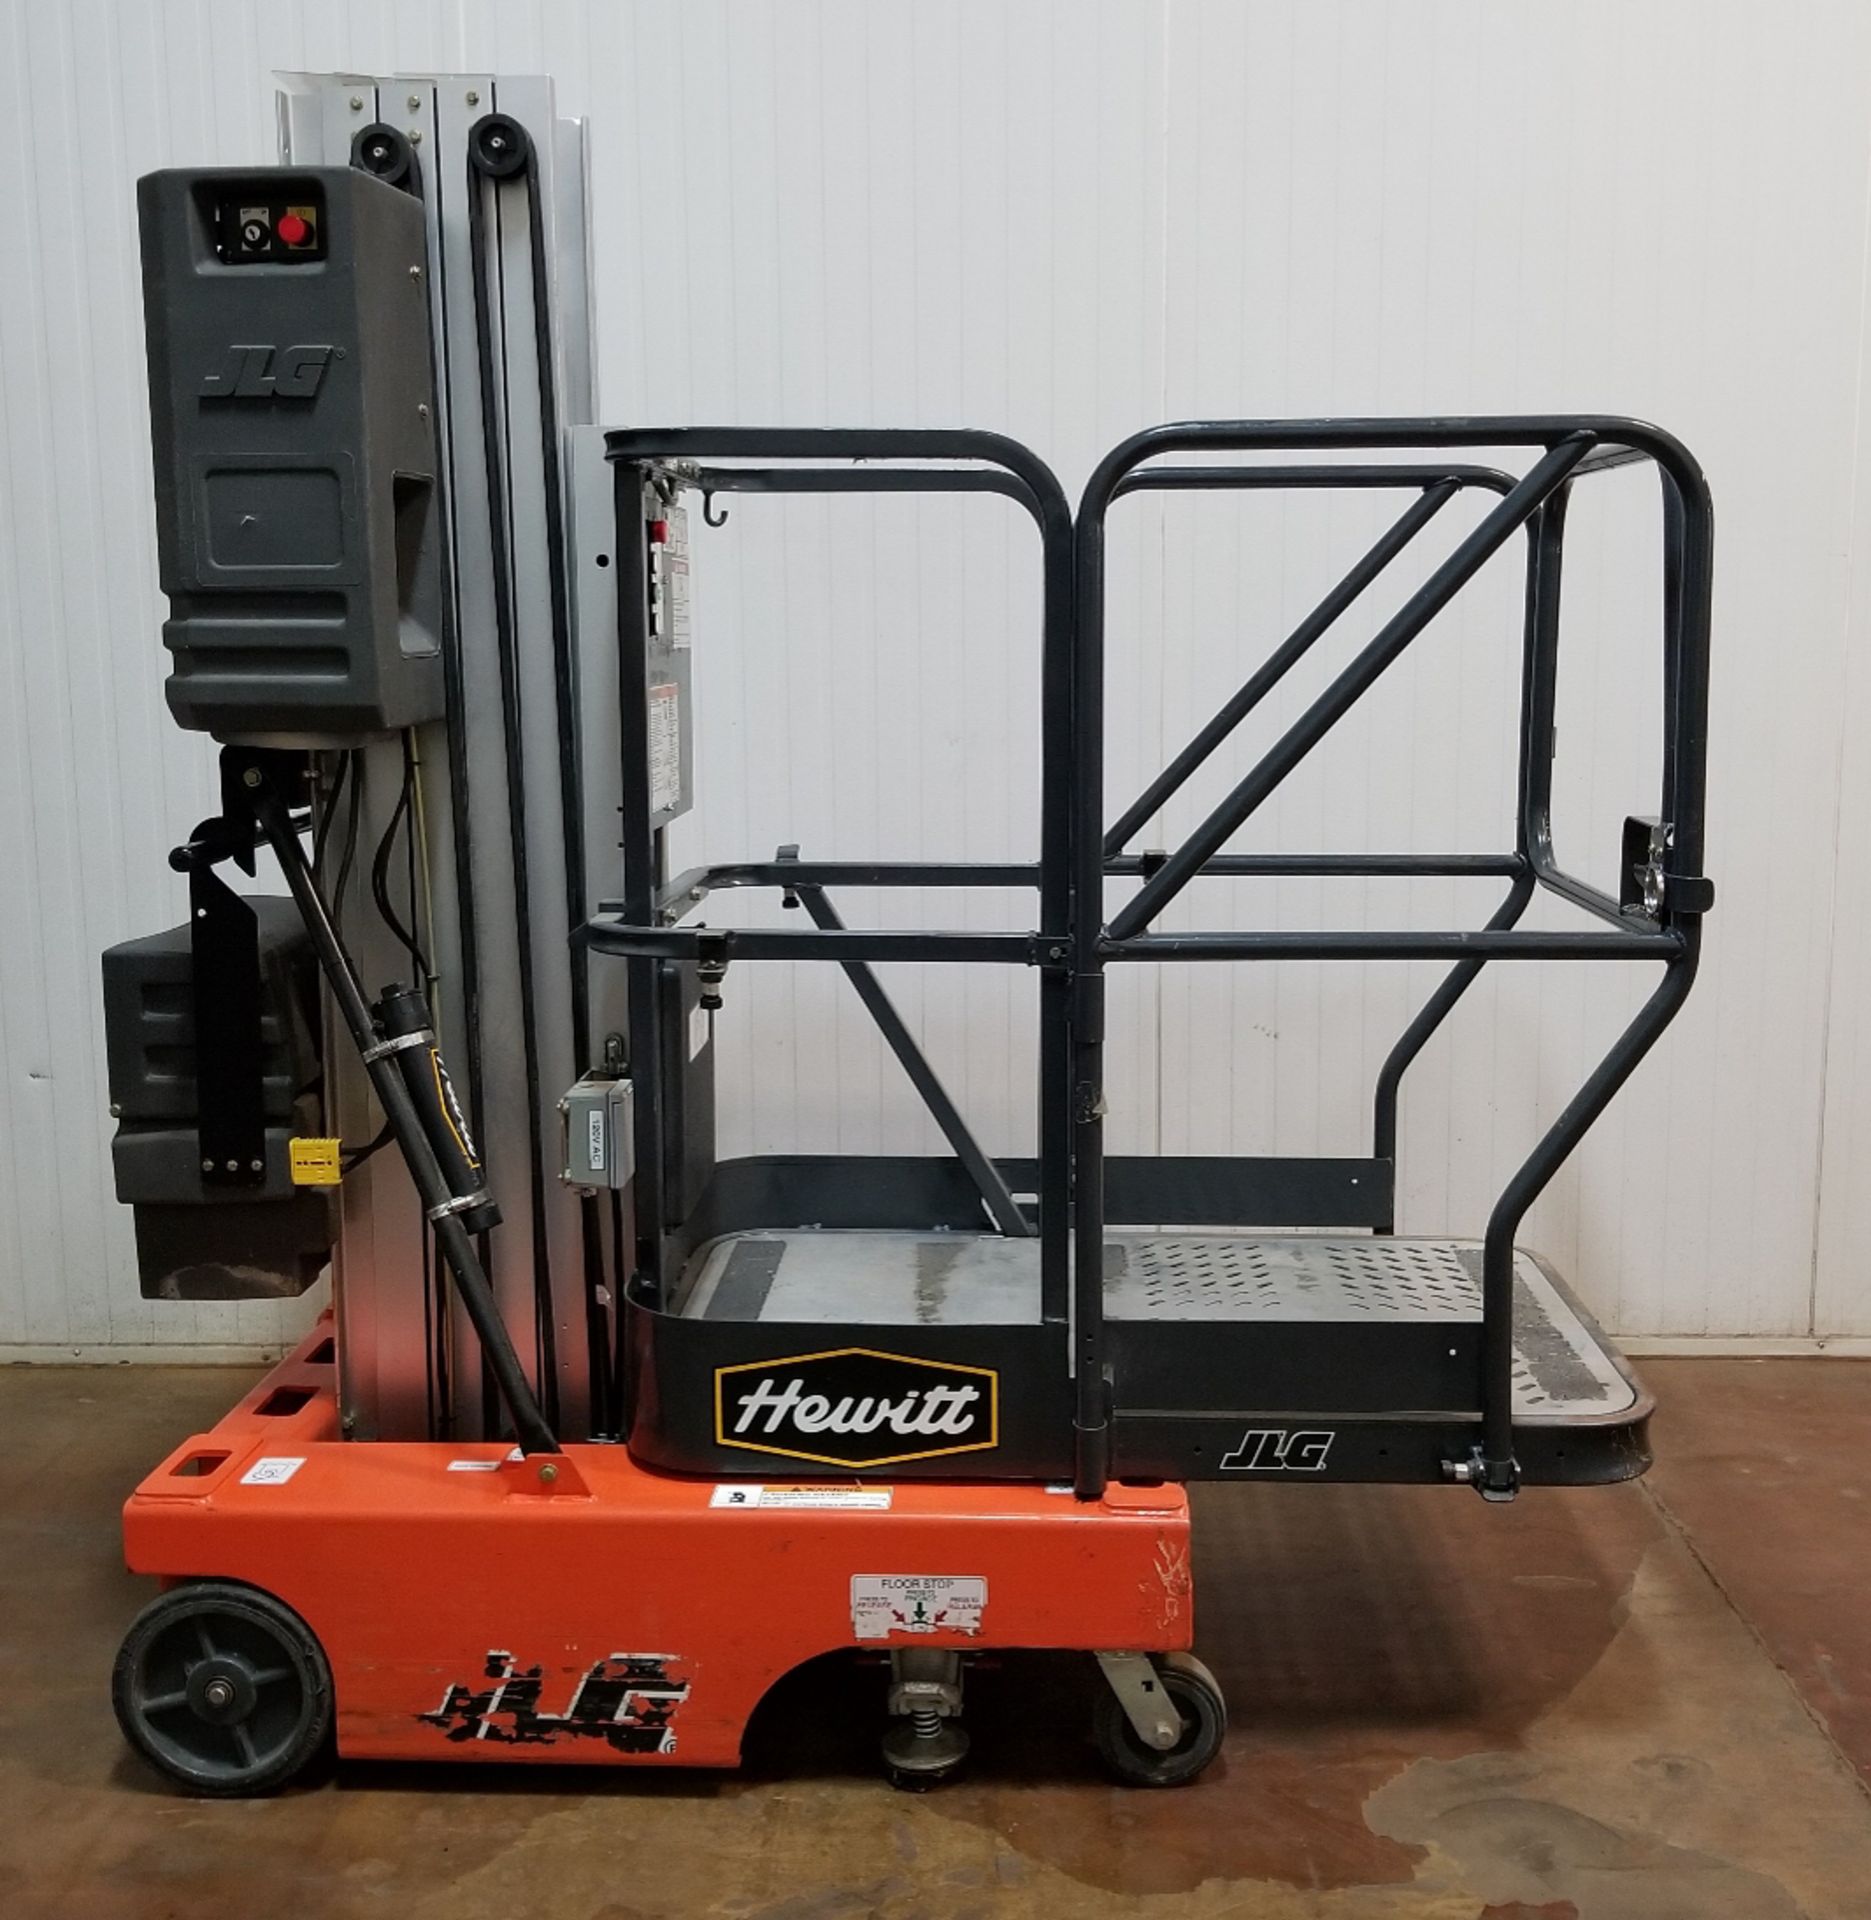 JLG (2016) 15SP 12V ELECTRIC ORDER PICKER WITH 400 LB. CAPACITY, 180" MAX. LIFT HEIGHT, BUILT-IN